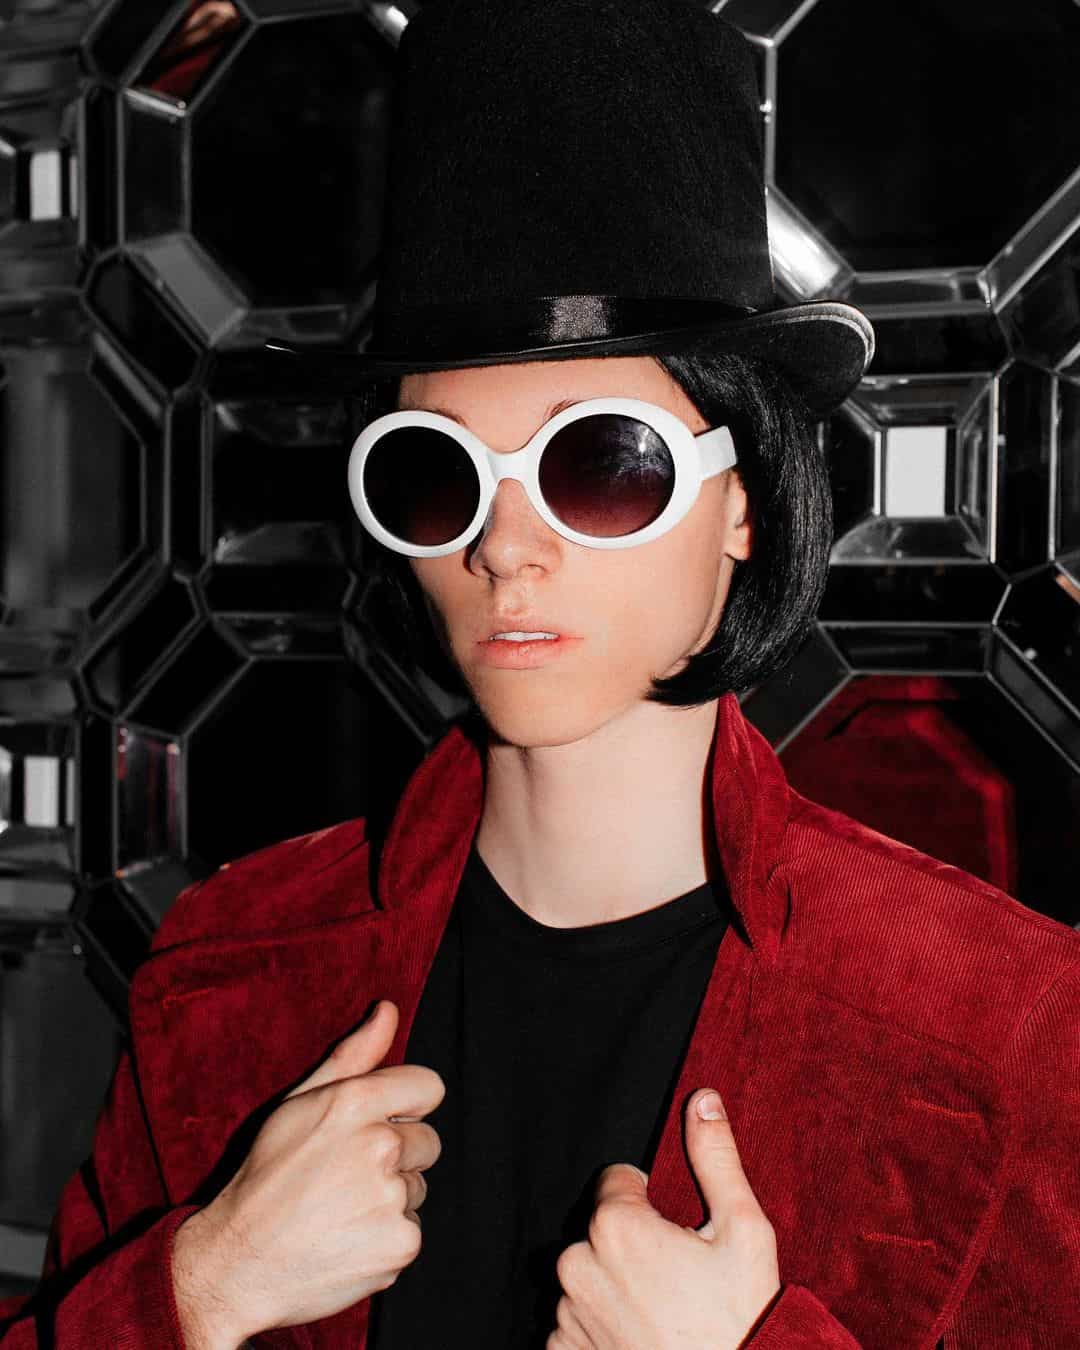 Willy Wonka Tiktok - Biography, Profile, Facts, and Career. 